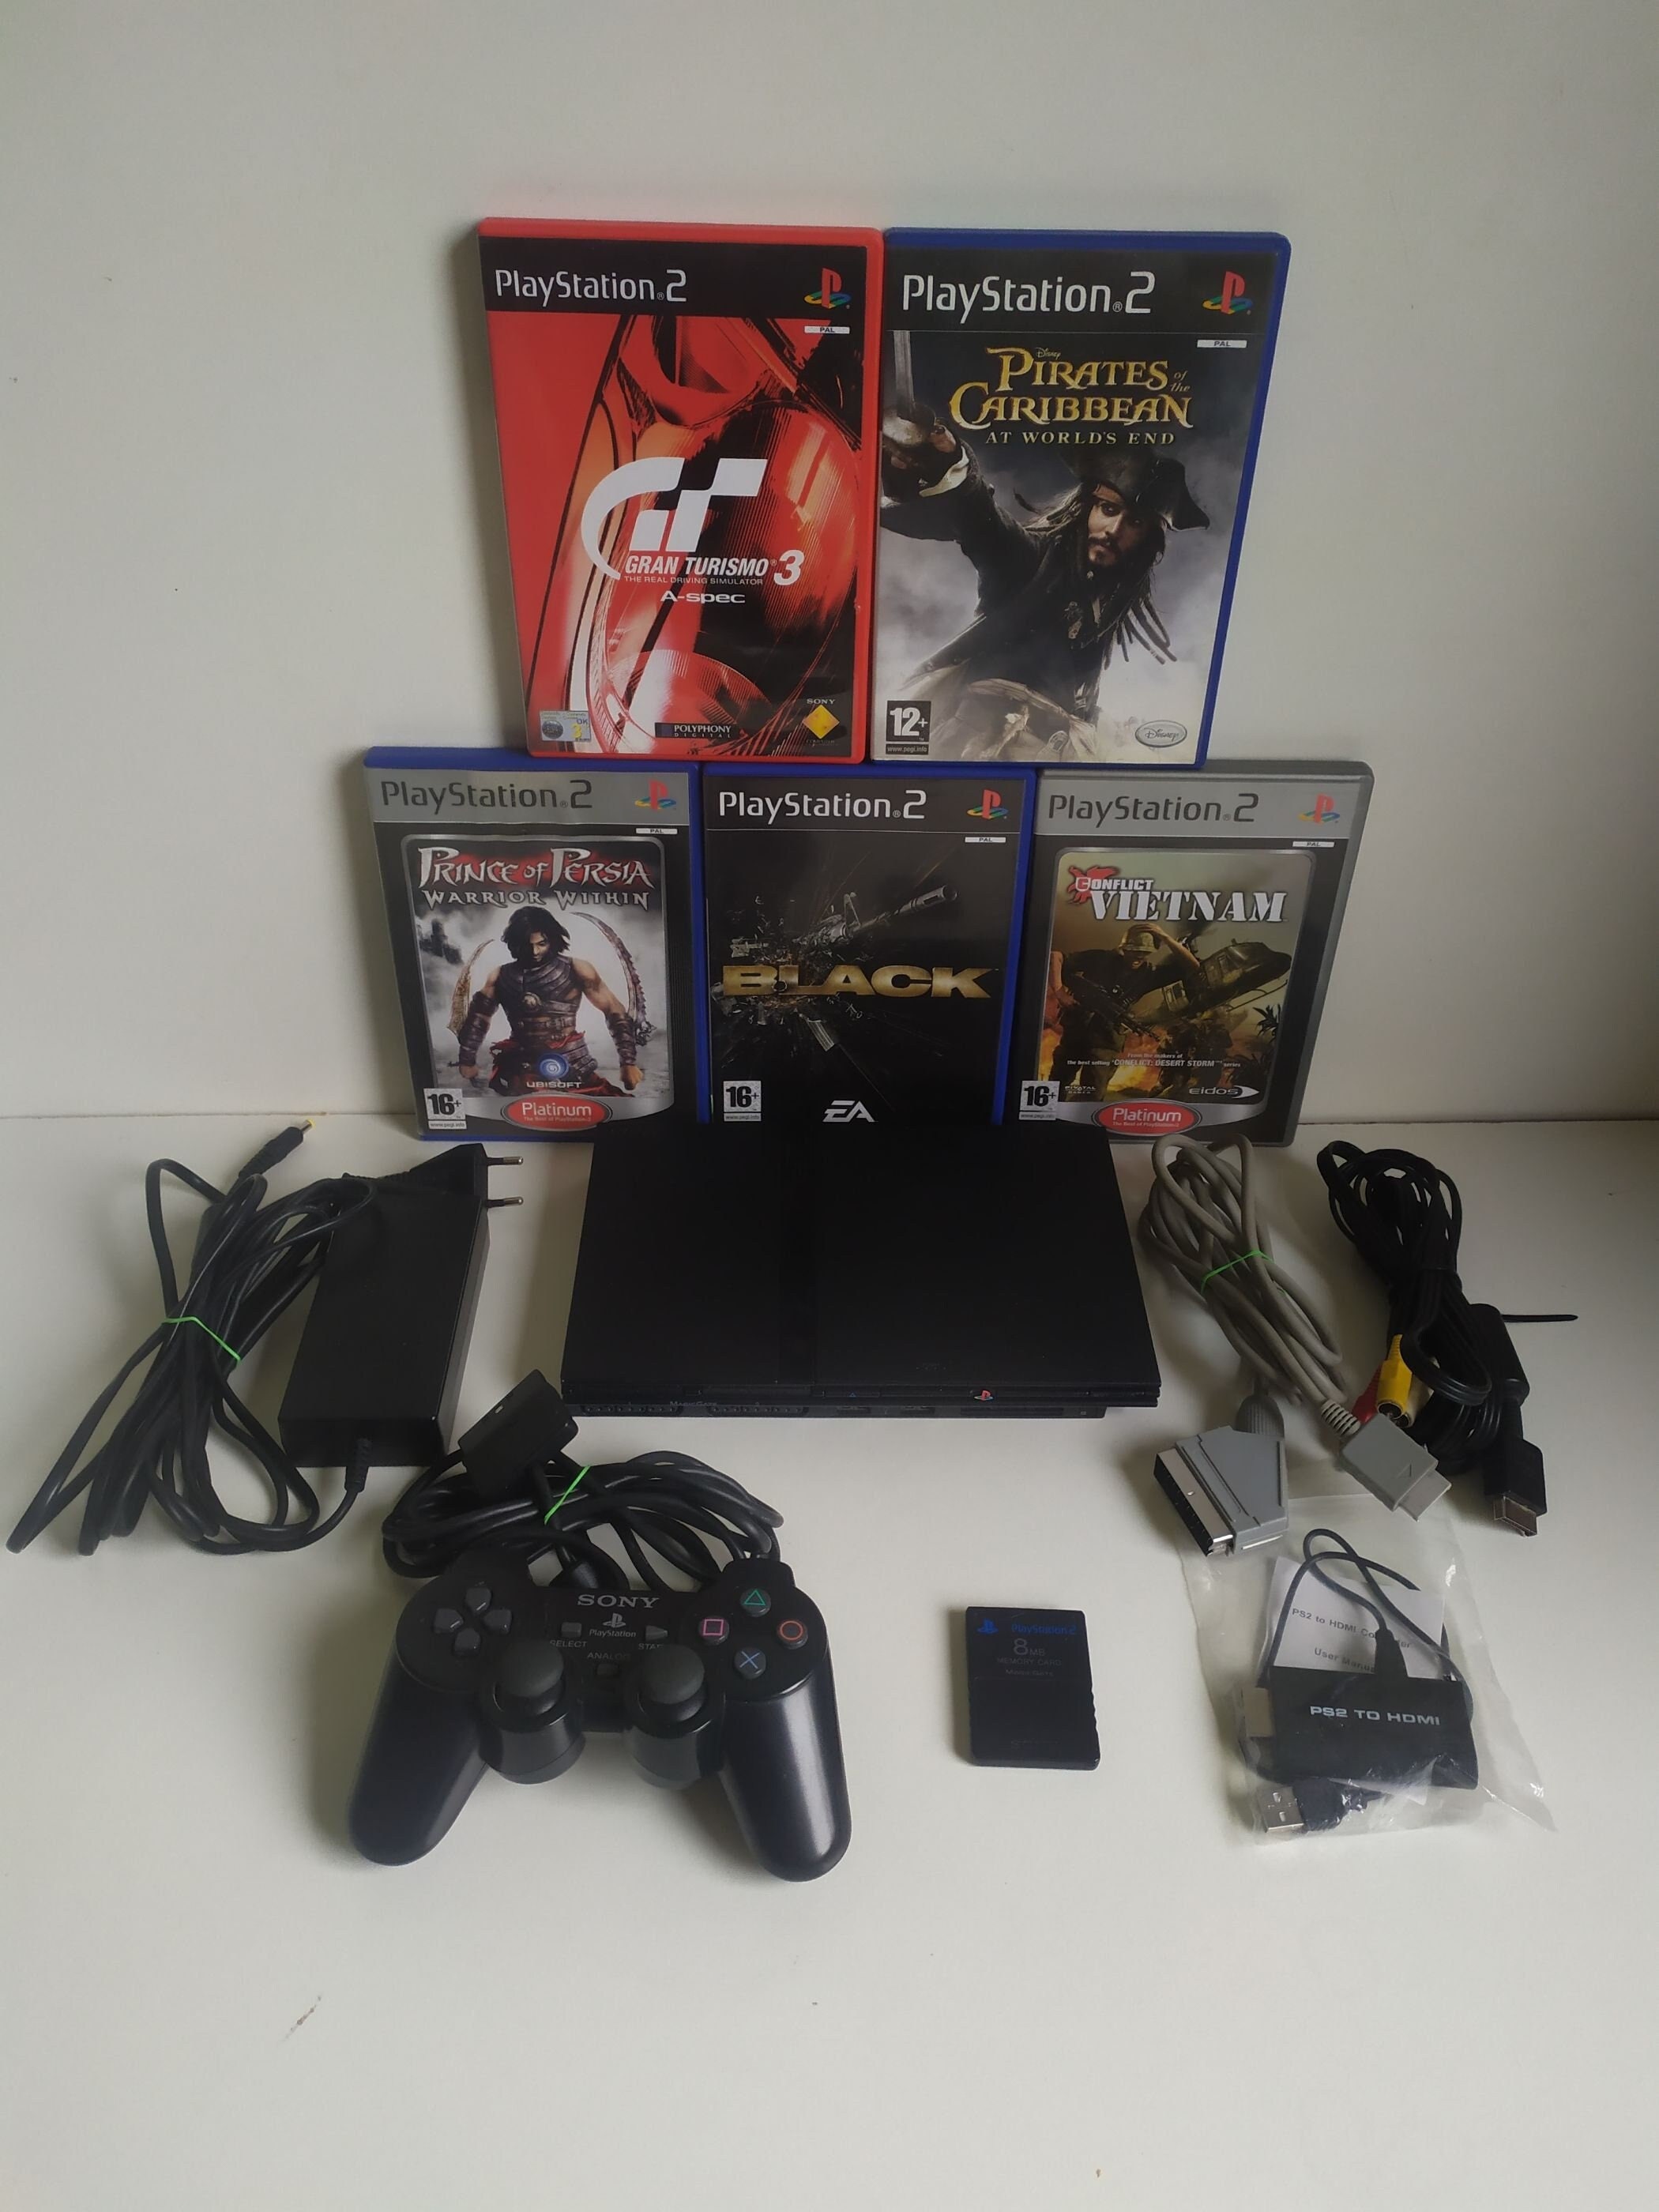 Sony Playstation 2 PS2 Console Bundle 2 Wireless Controllers (Used